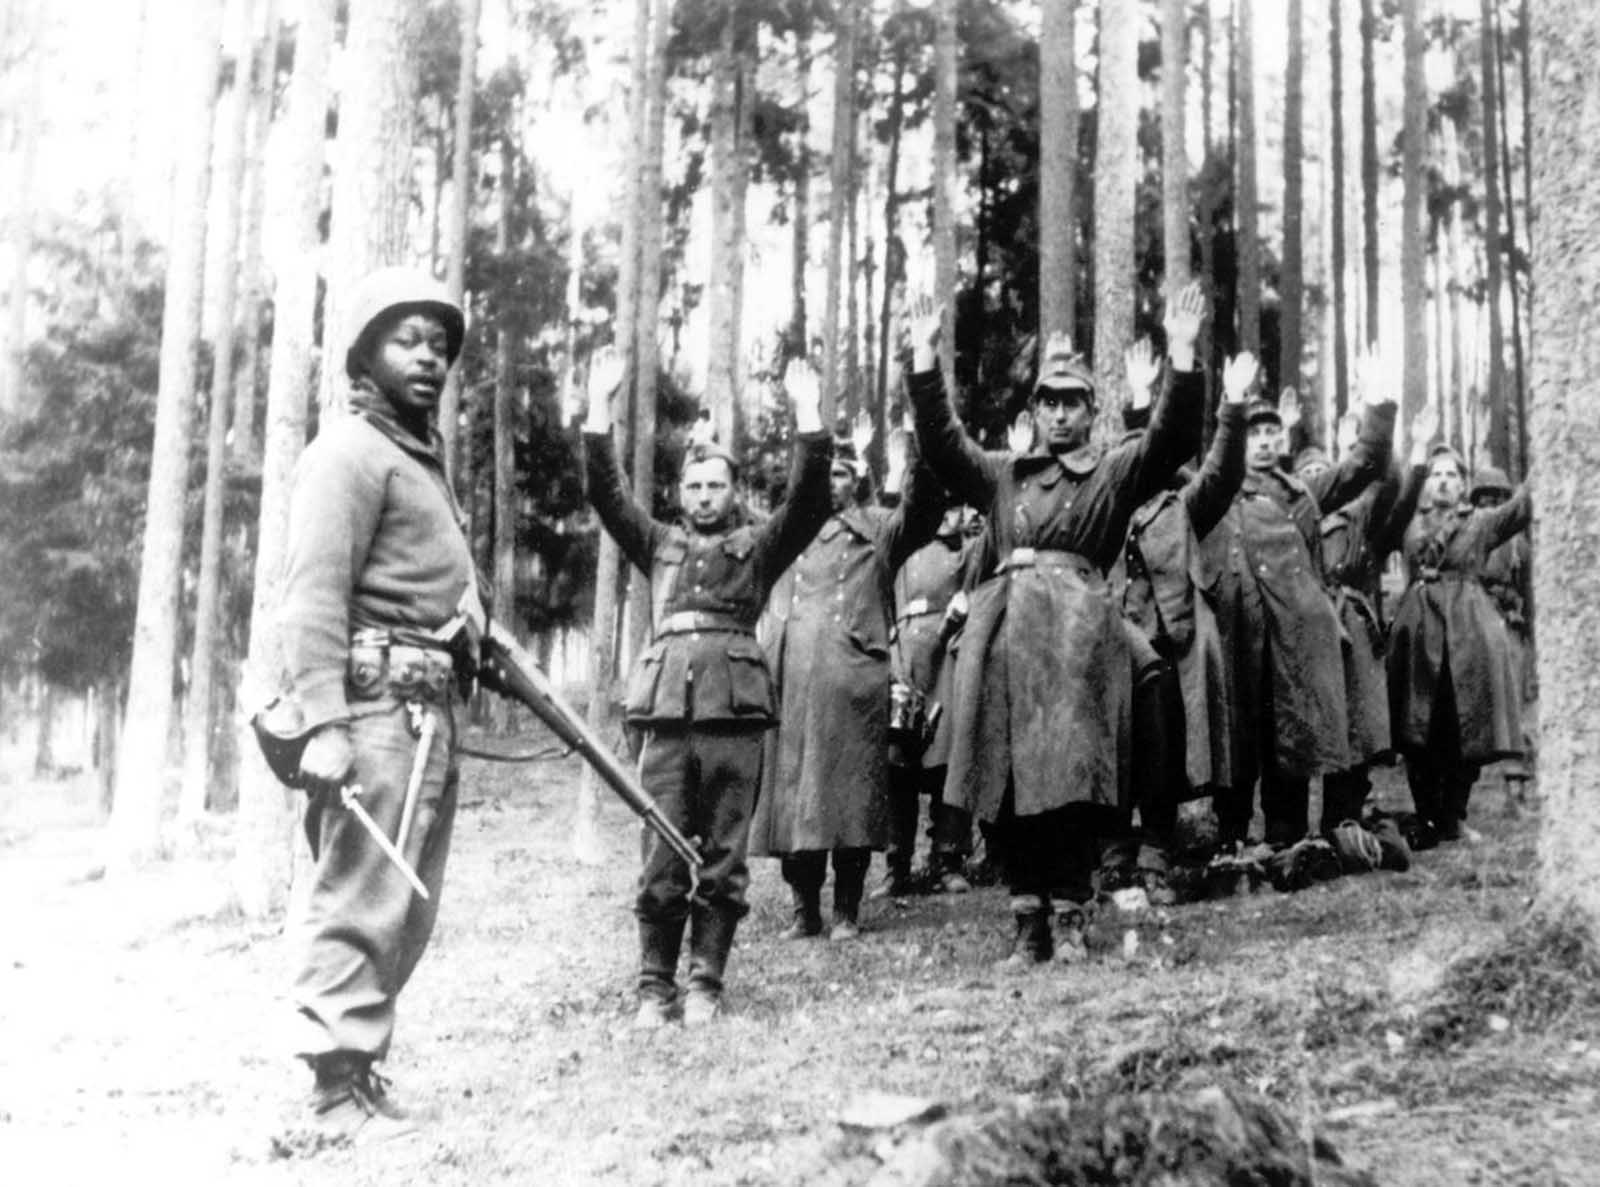 An American soldier of the 12th Armored Division stands guard over a group of German soldiers, captured in April 1945, in a forest at an unknown location in Germany.